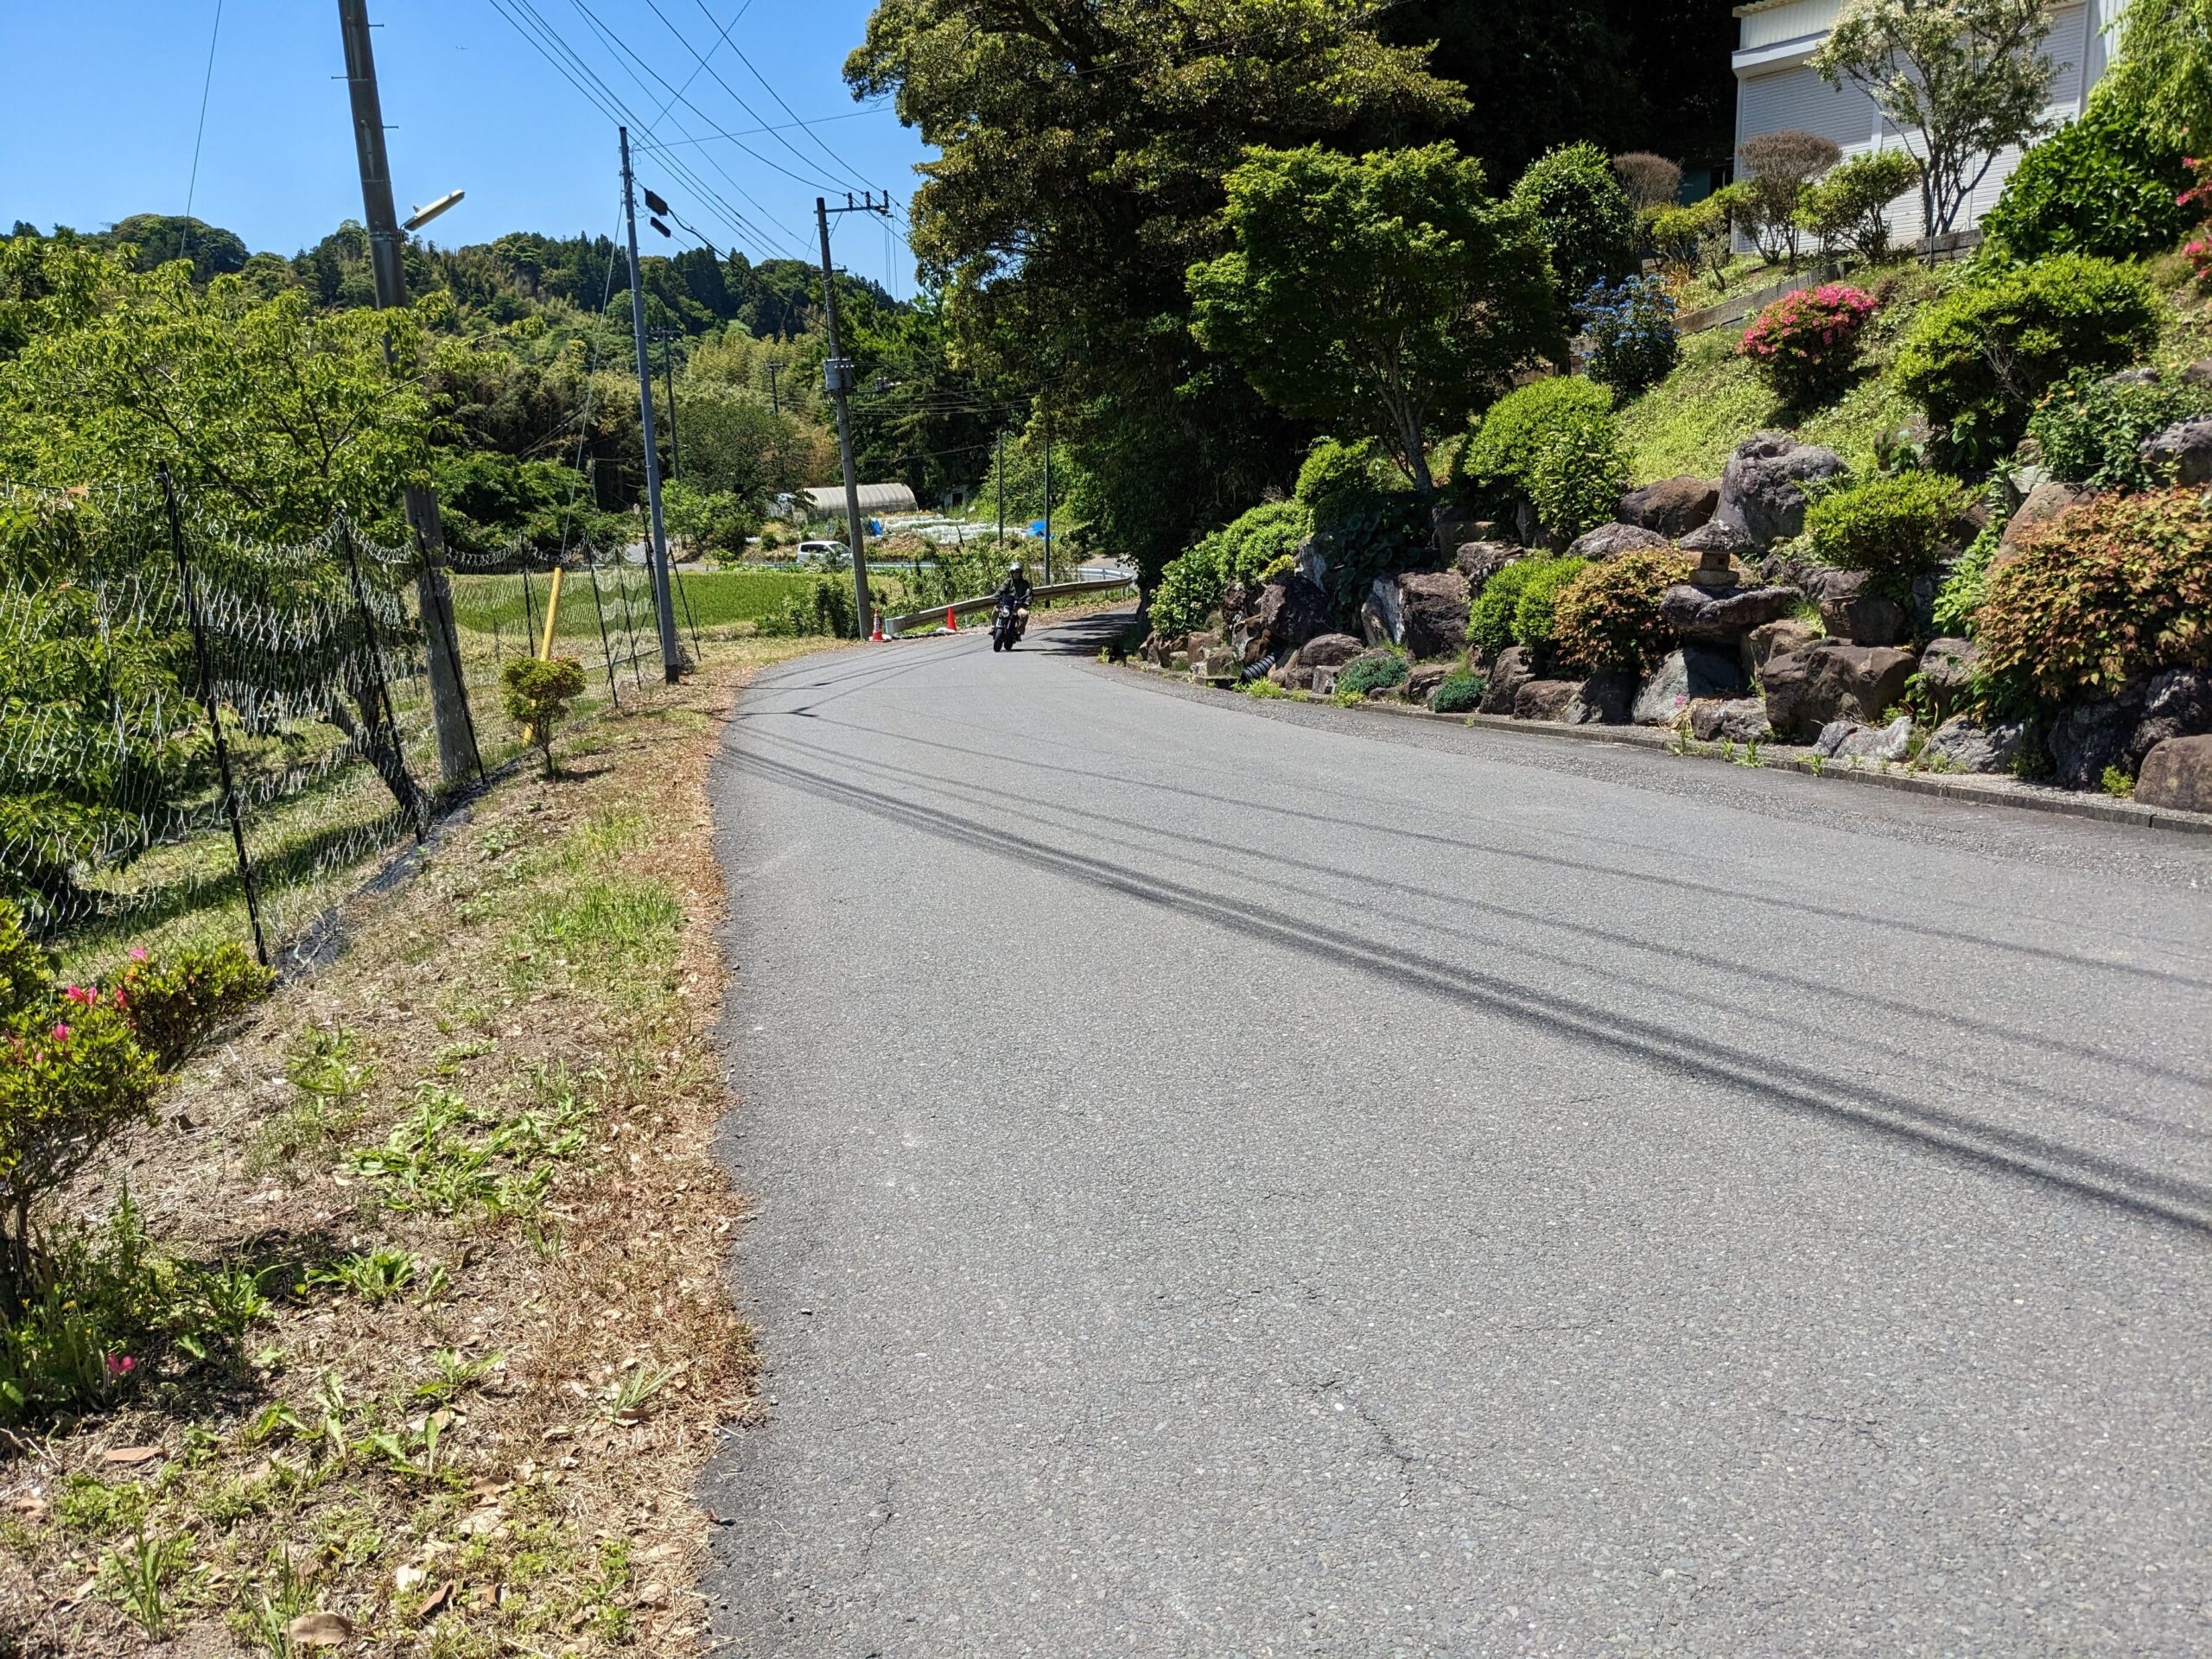 How to Drive in Inaka